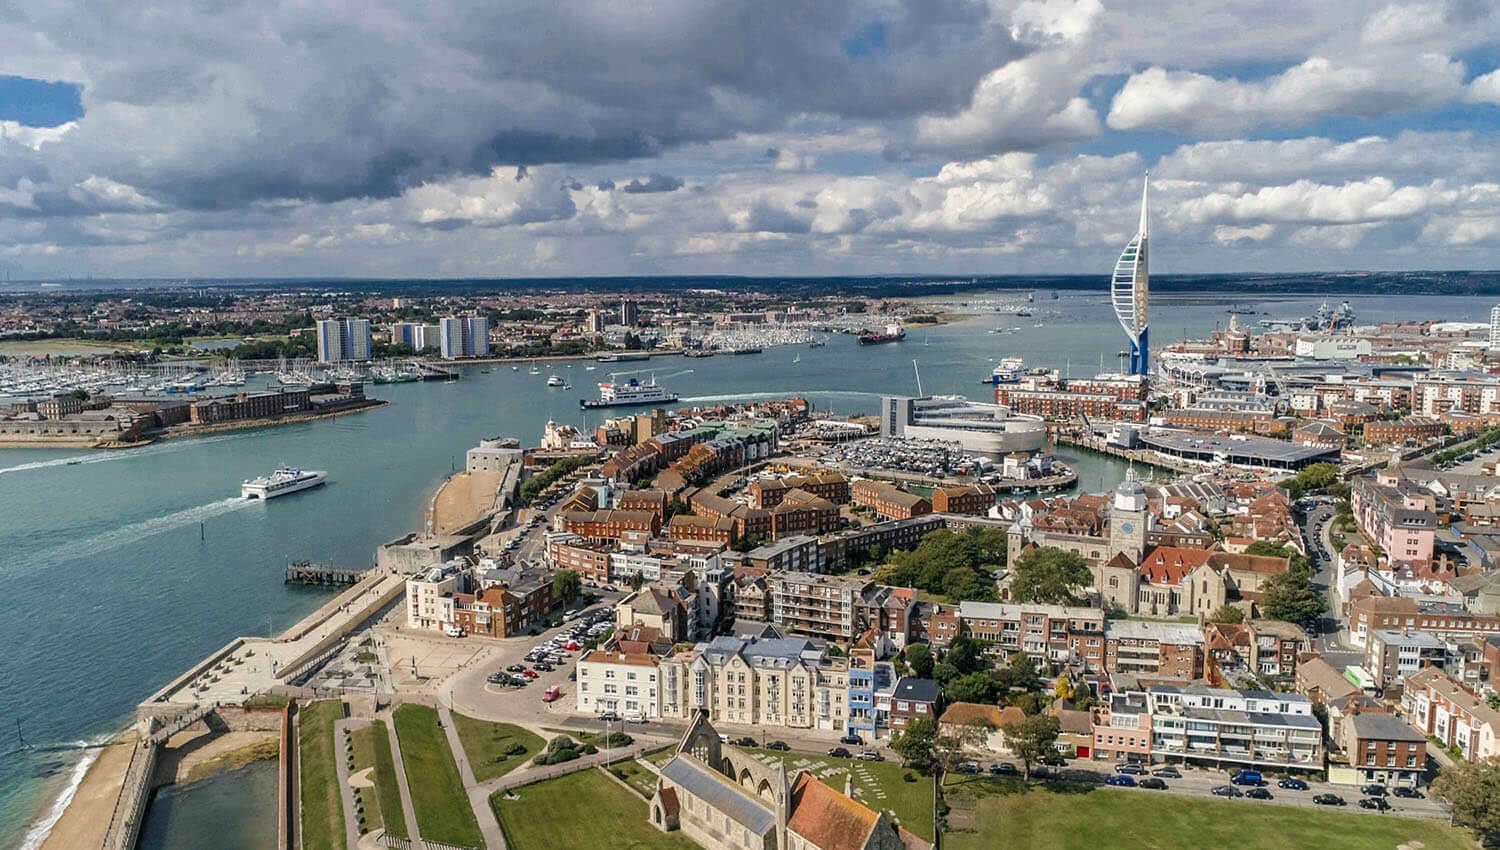 portsmouth city dock and landscape with cloudy sky boats on water